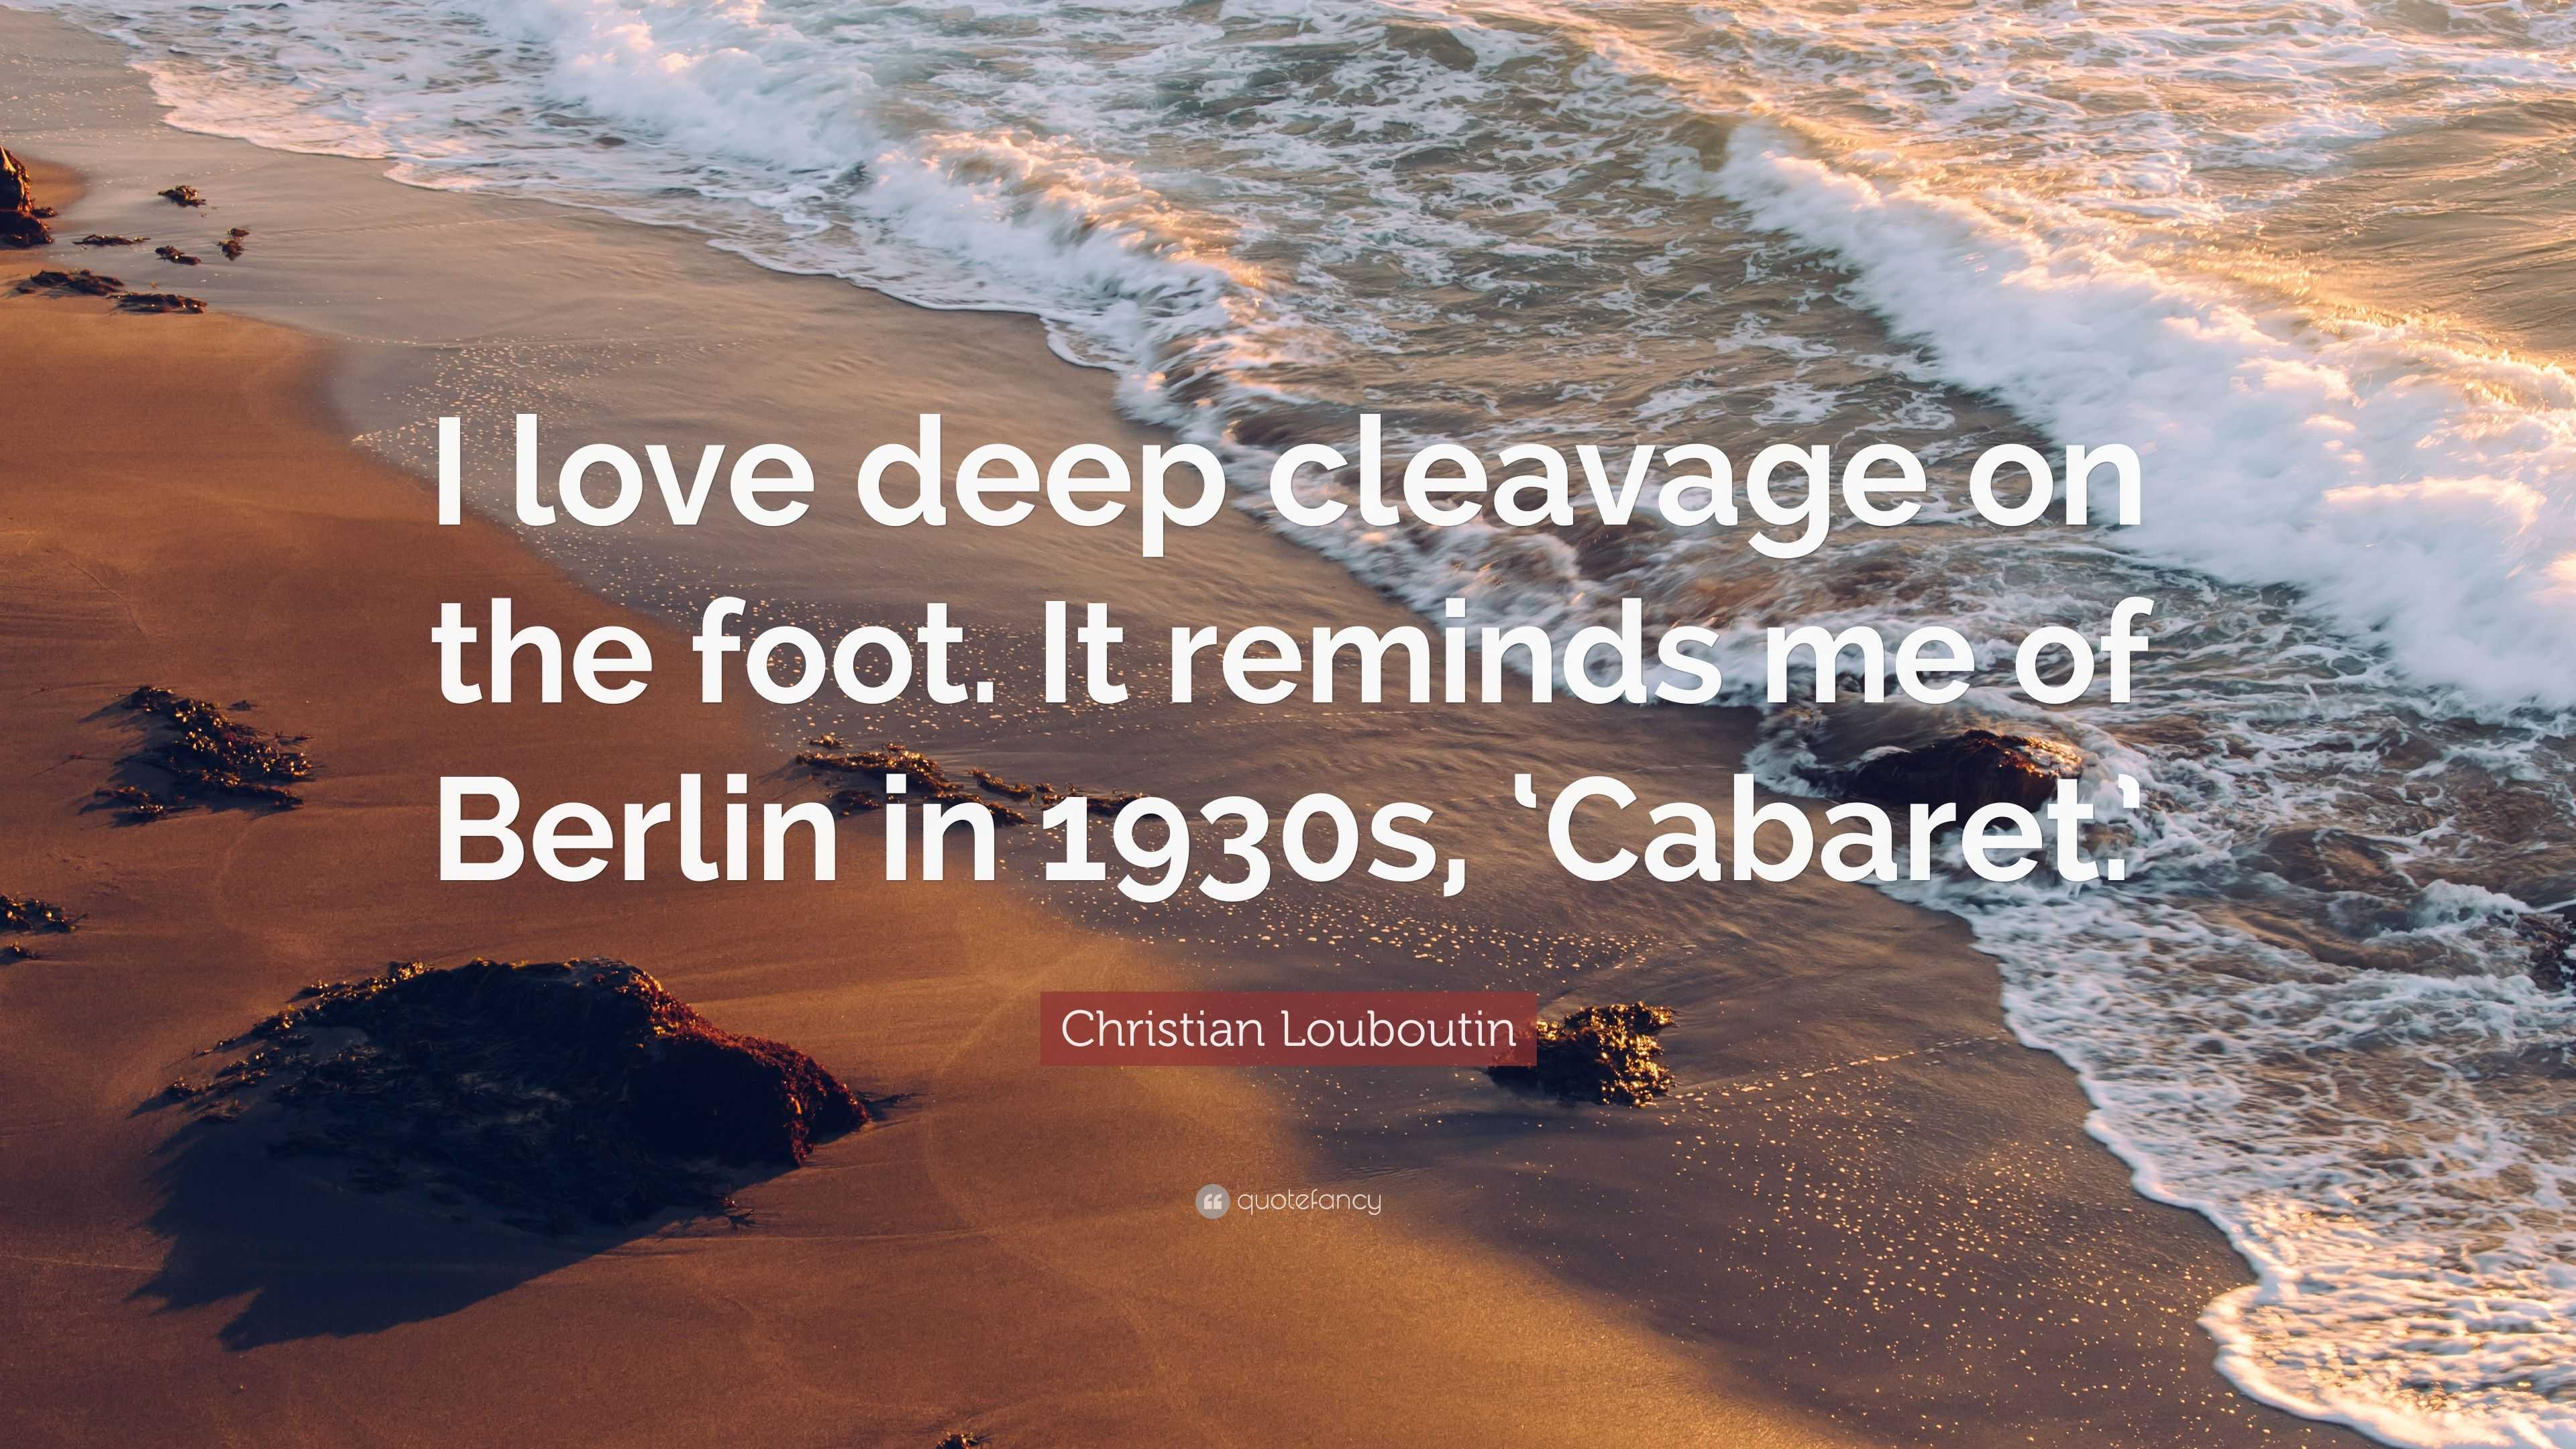 https://quotefancy.com/media/wallpaper/3840x2160/2927874-Christian-Louboutin-Quote-I-love-deep-cleavage-on-the-foot-It.jpg